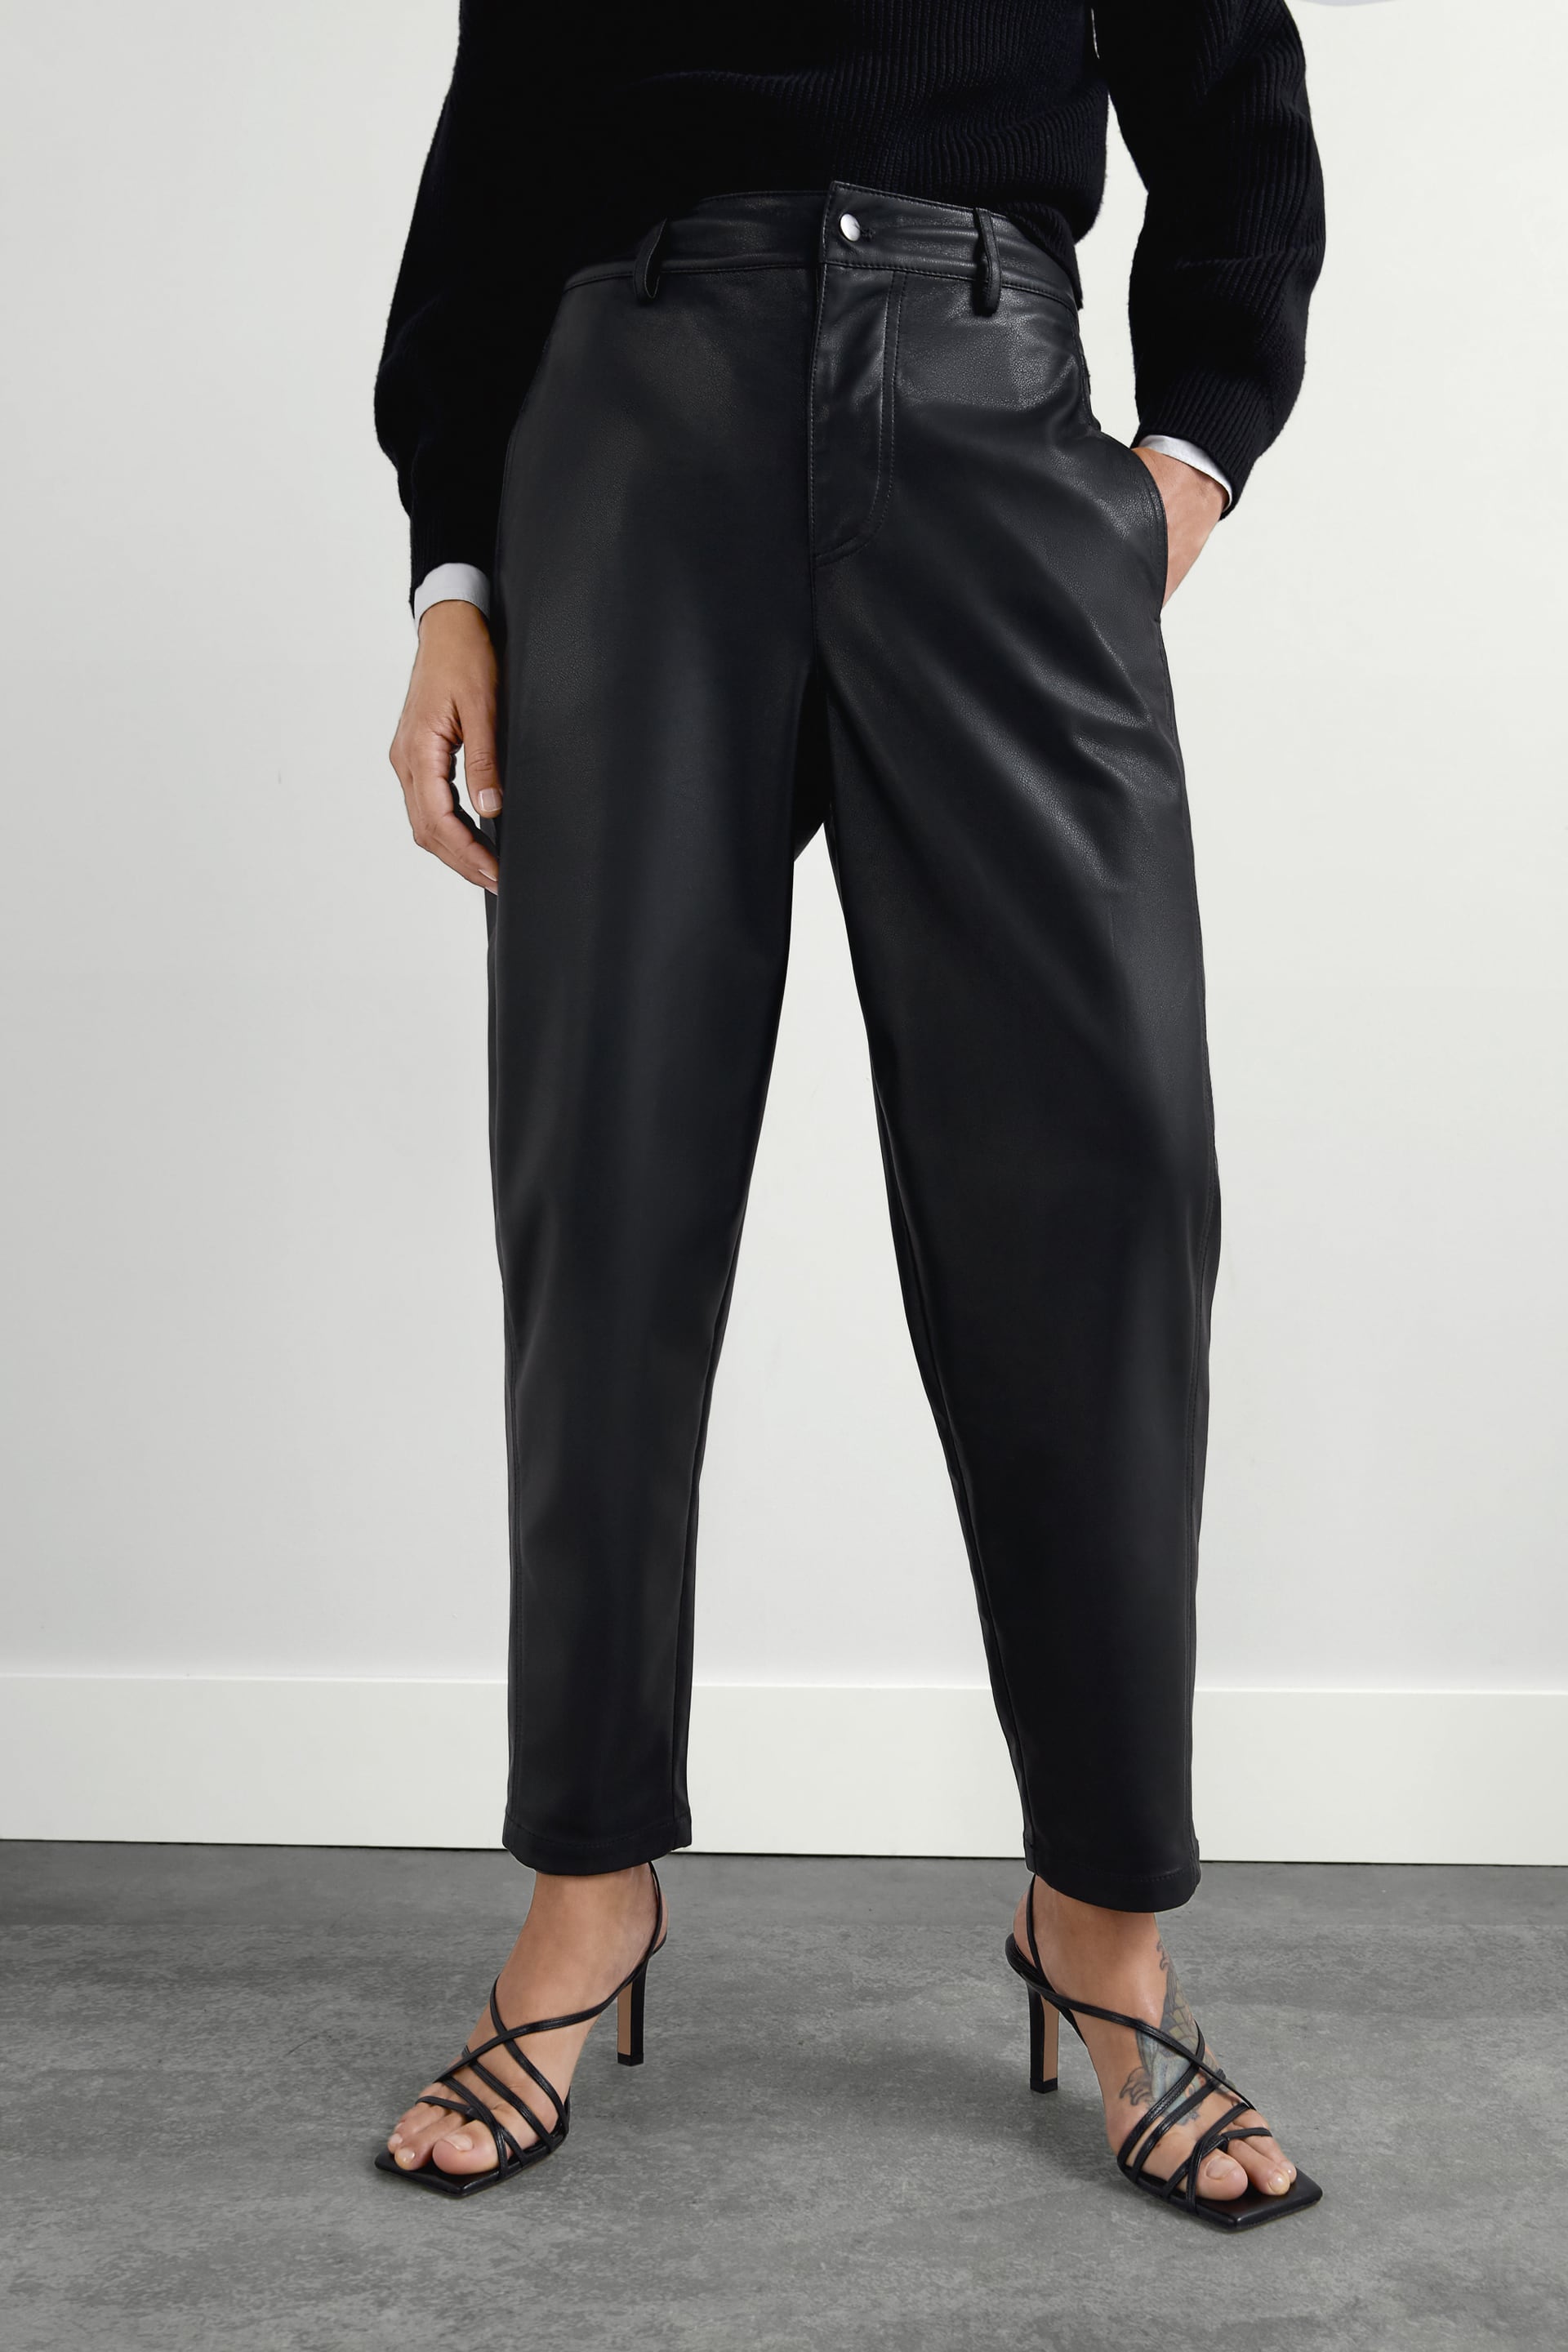 Zara Leather Trousers  Leather pants, Leather trousers, Pants for